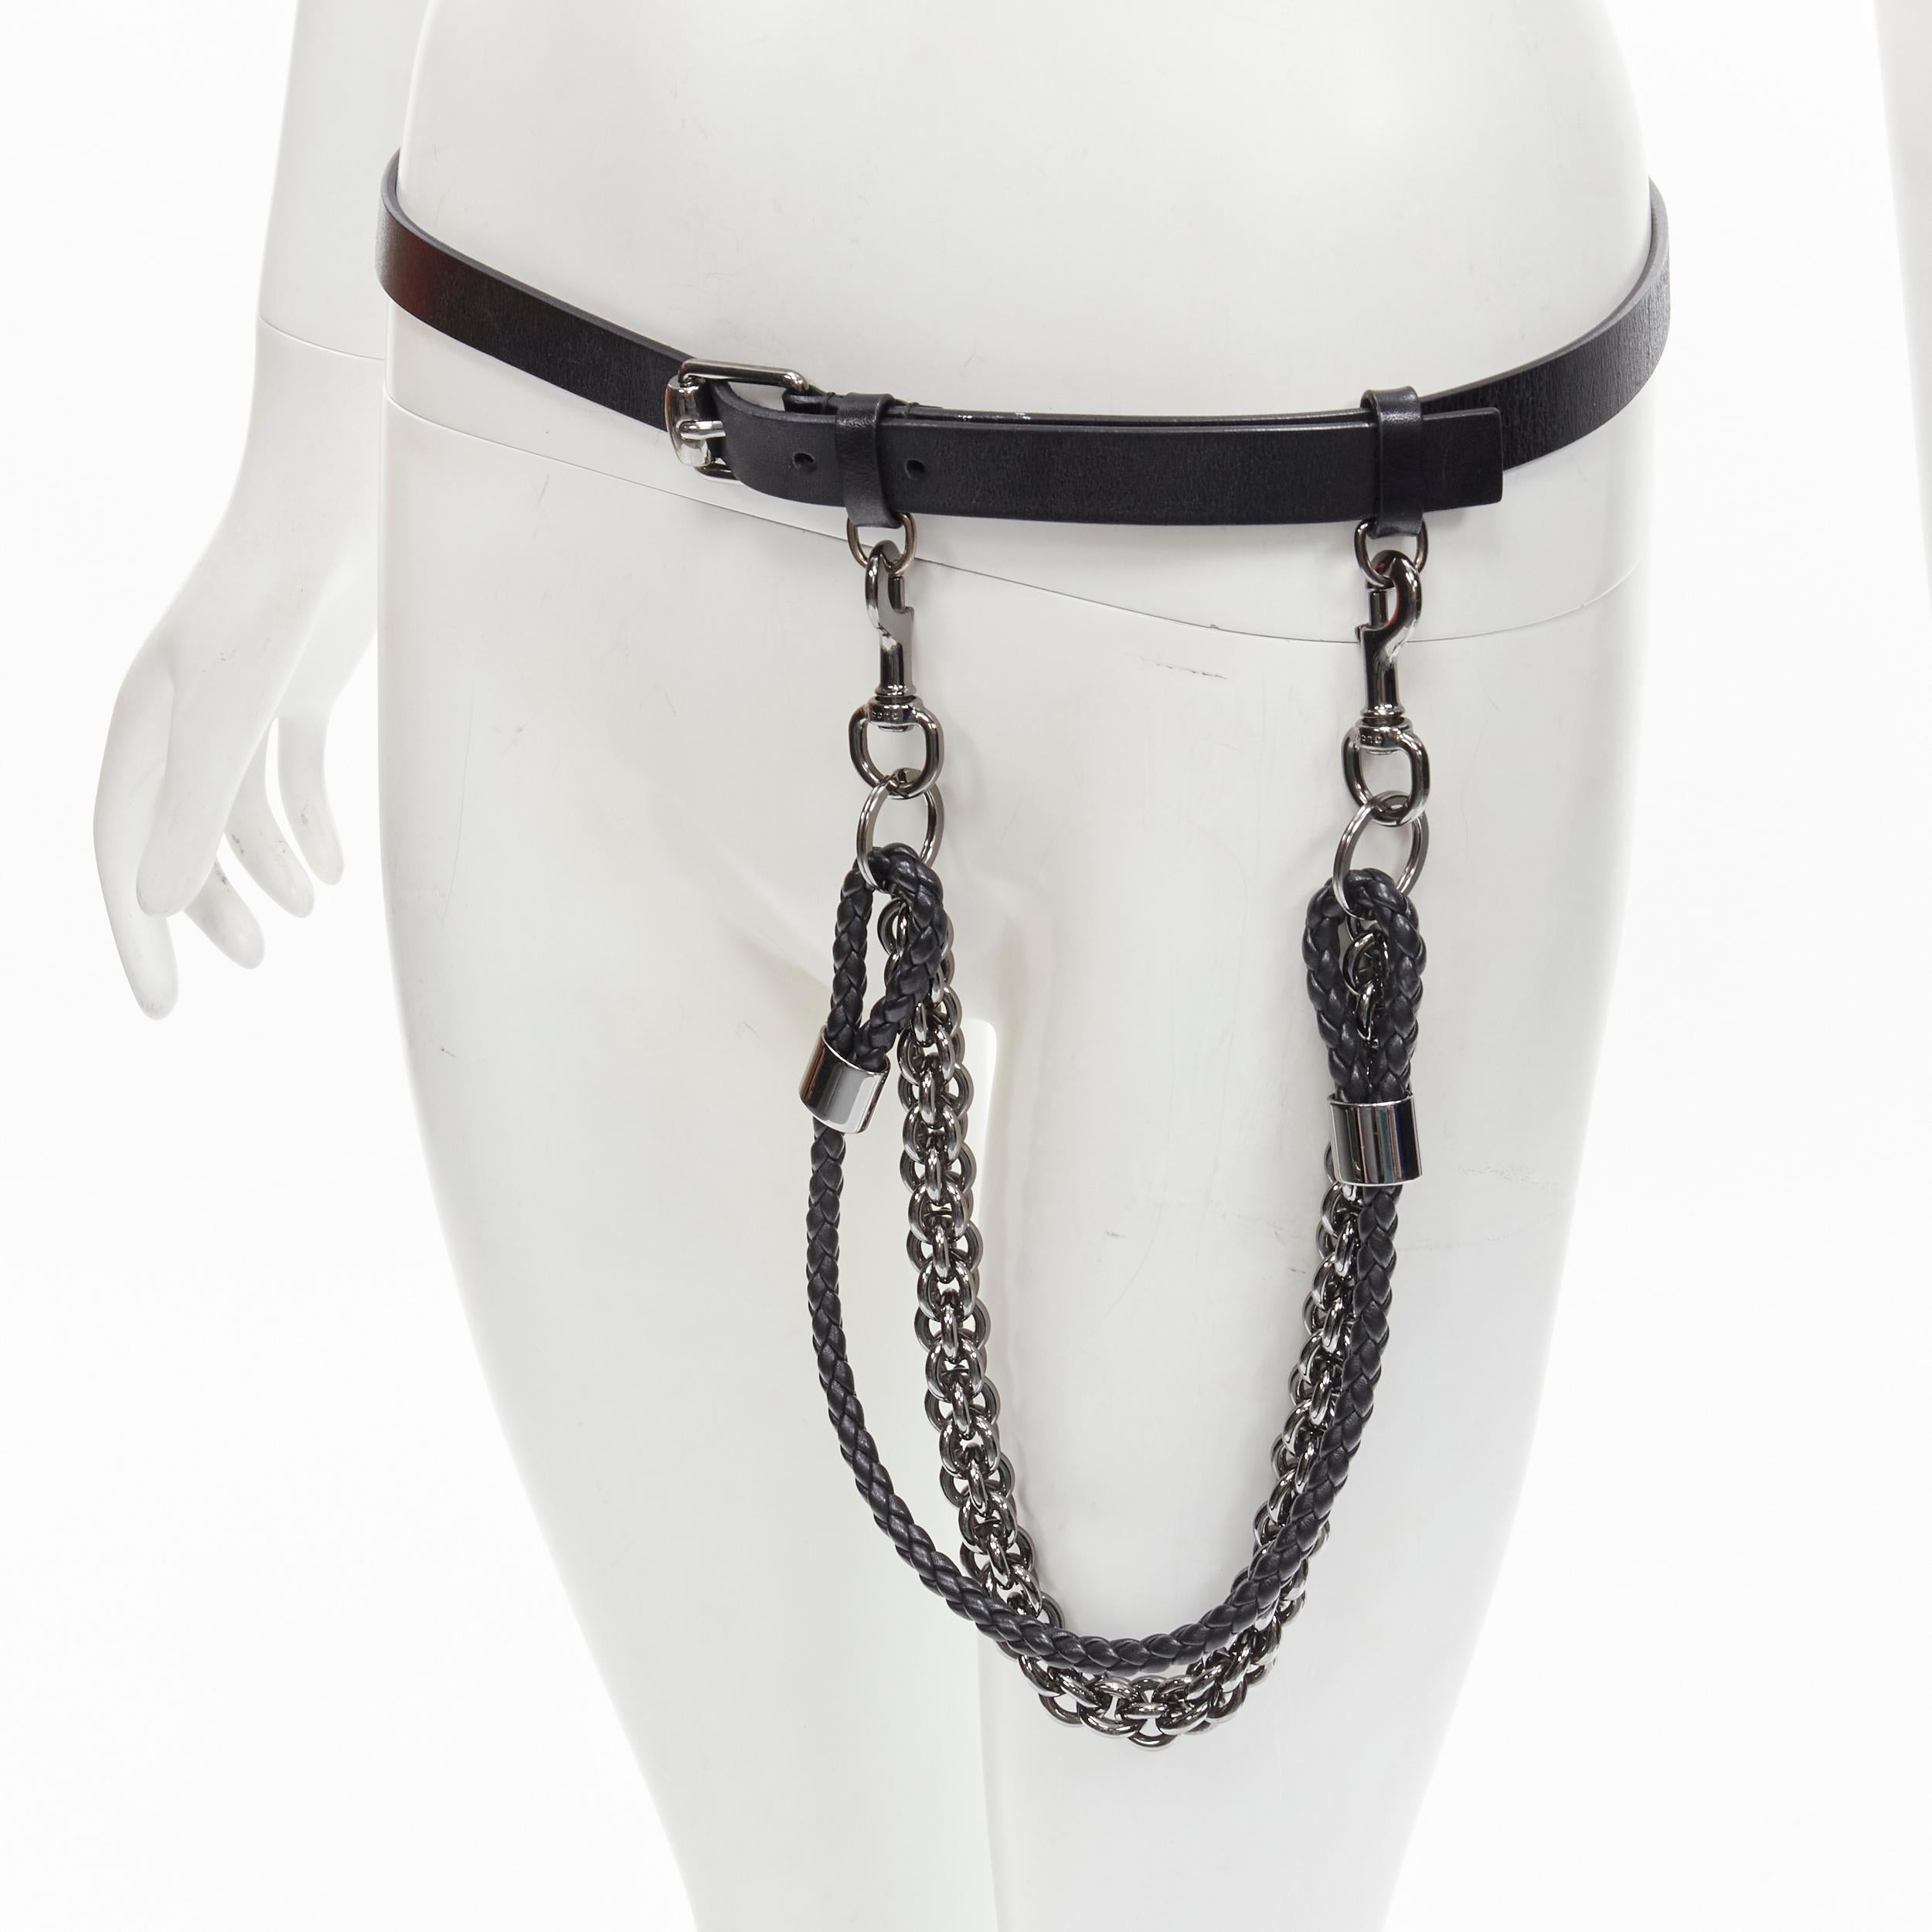 GUCCI black leather braided leather metal link chain skinny belt 85cm
Brand: Gucci
Extra Detail: Black leahter with gunmetal silver hardware. Detachable metal chain and leaded braided strap with lobster clasp lock.

CONDITION:
Condition: Excellent,